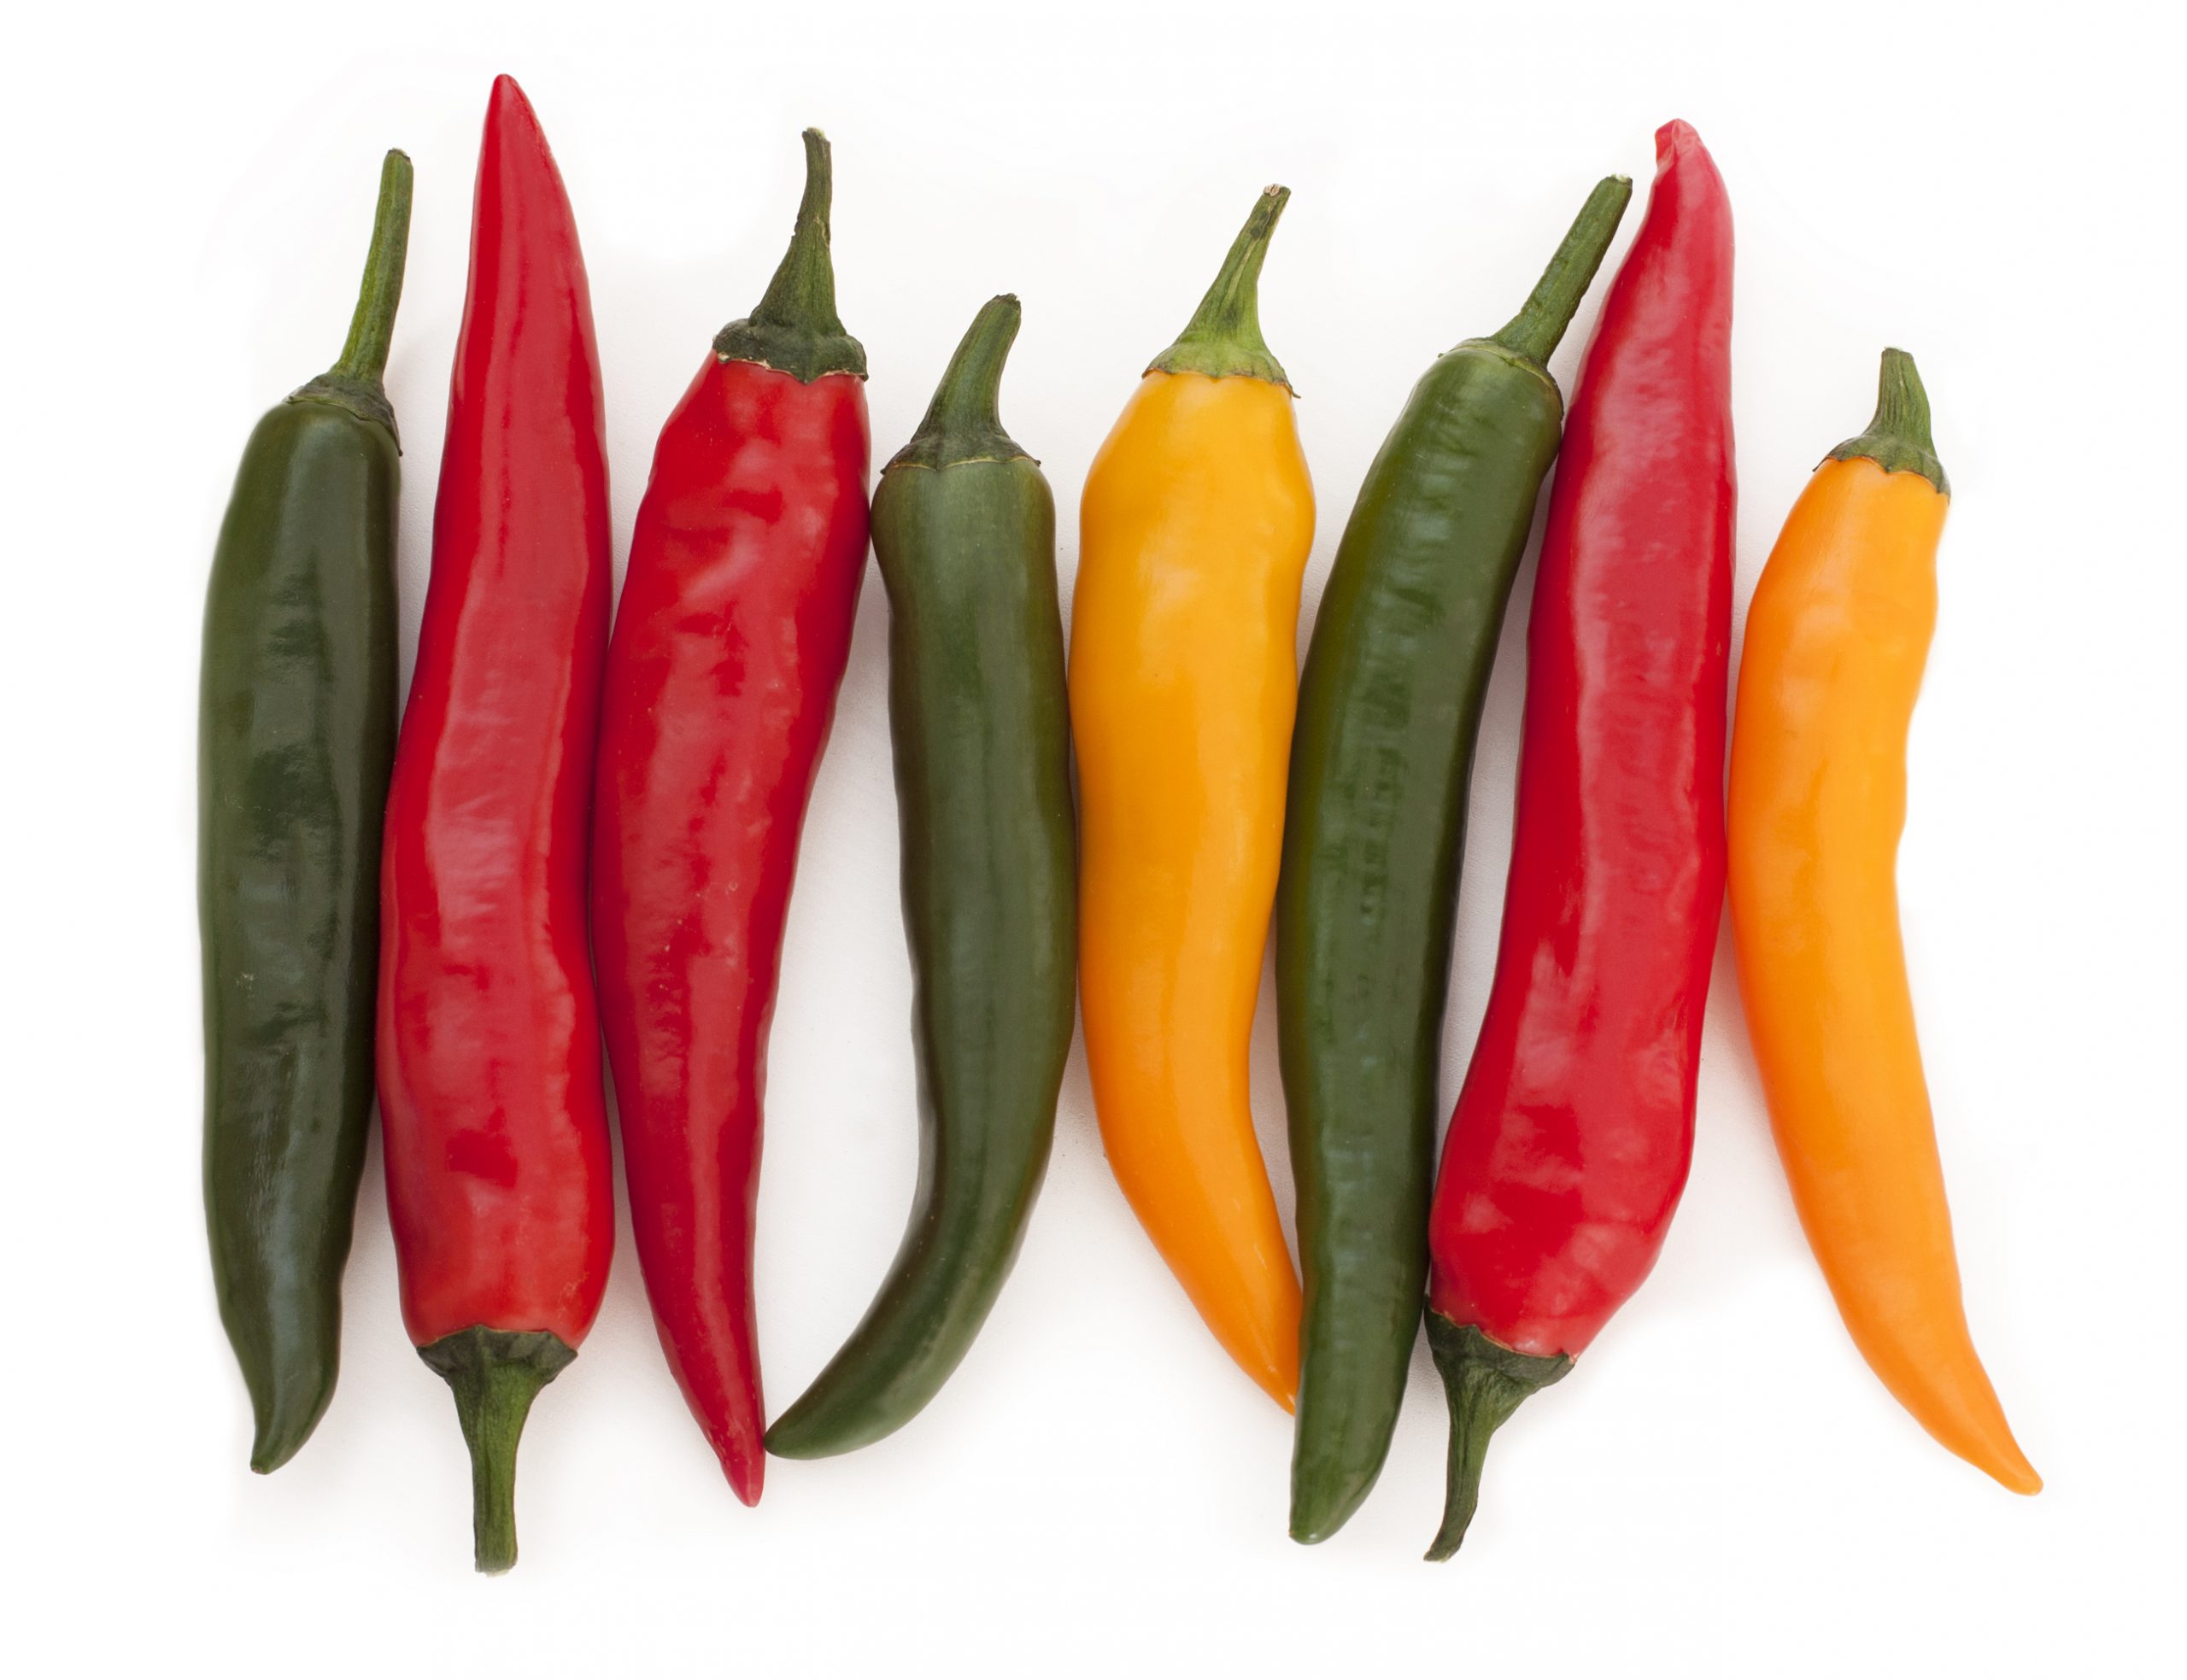 Study Finds Hot Chili Peppers May Extend Life